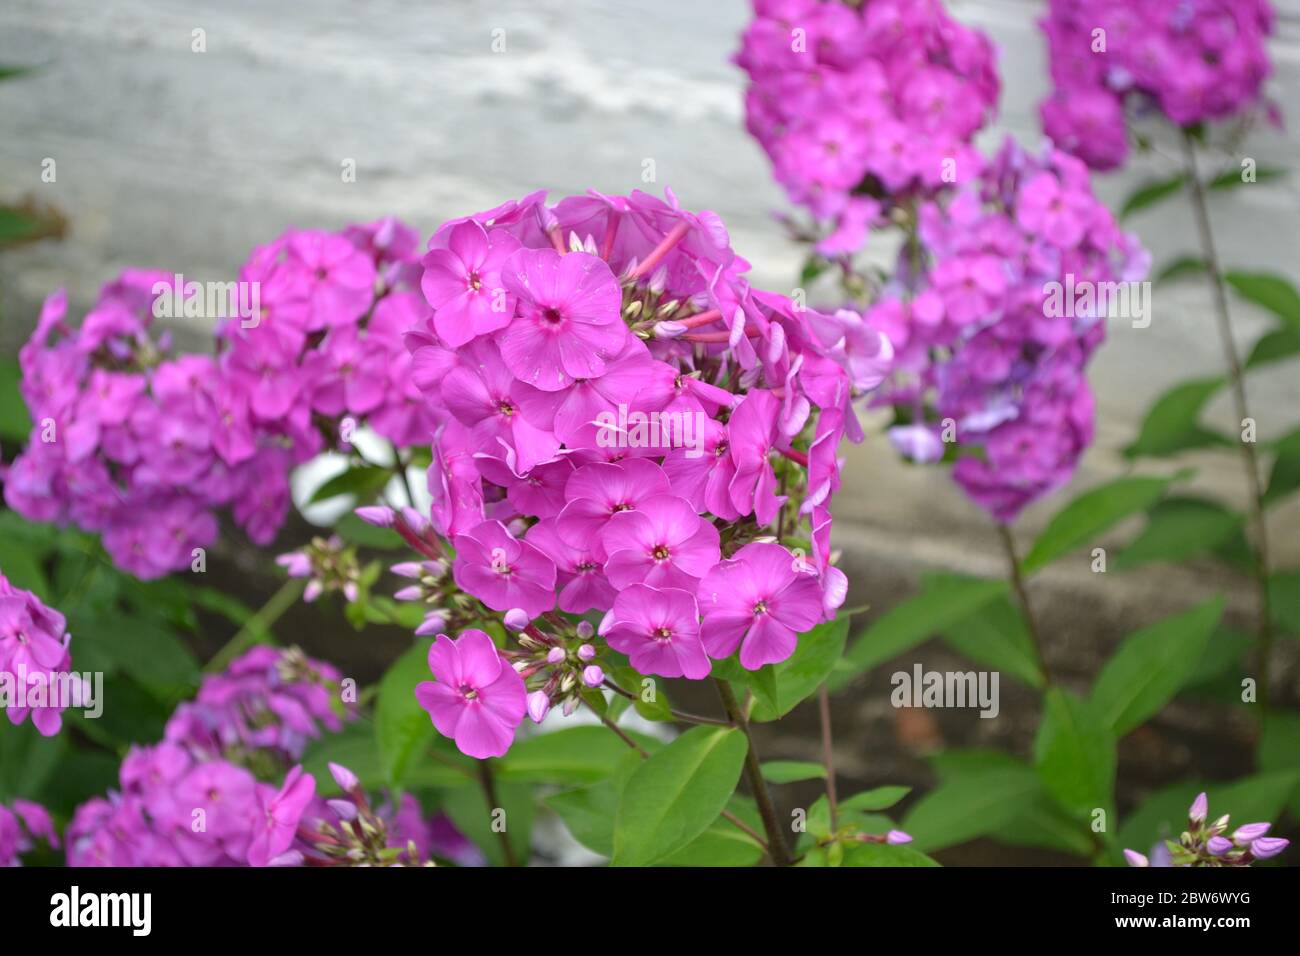 Green leaves, bushes. Gardening. Beautiful inflorescences. Phlox flower. Perennial herbaceous plant. High branches. Purple flowers Stock Photo